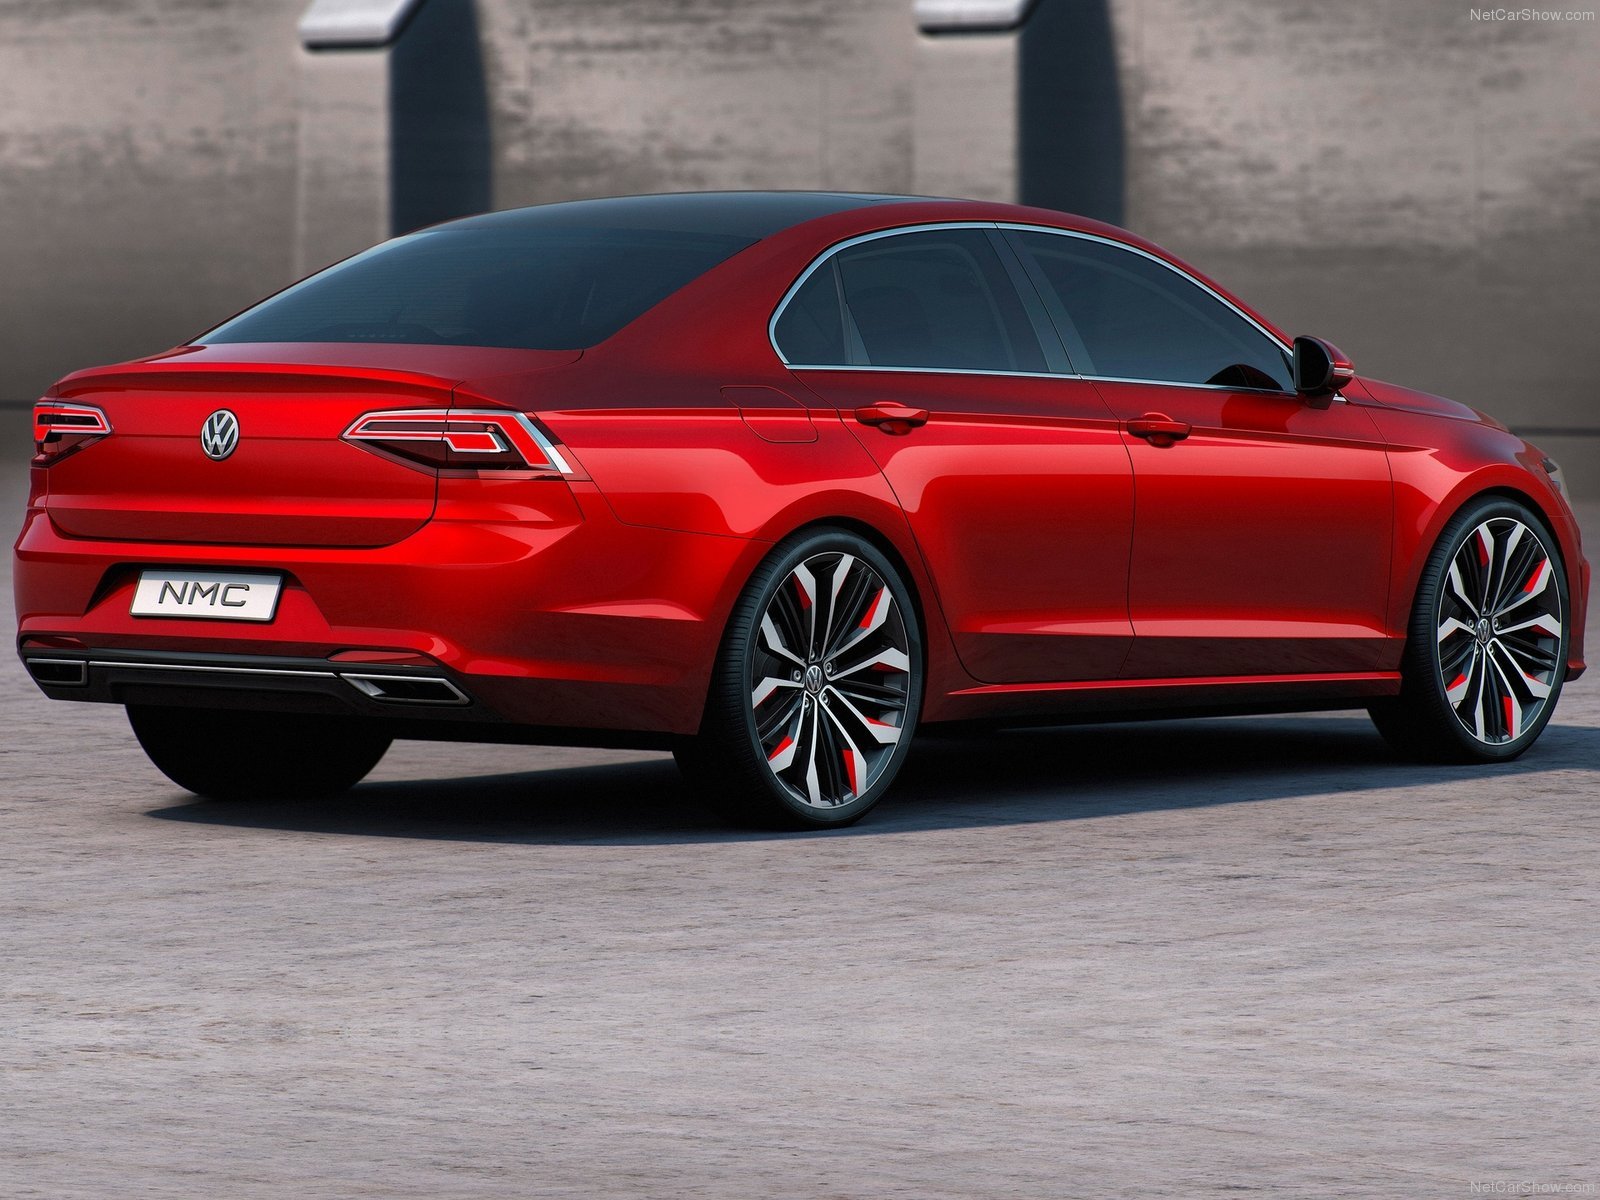 volkswagen, New, Midsize, Coupe, Concept, Cars, 2014 Wallpaper